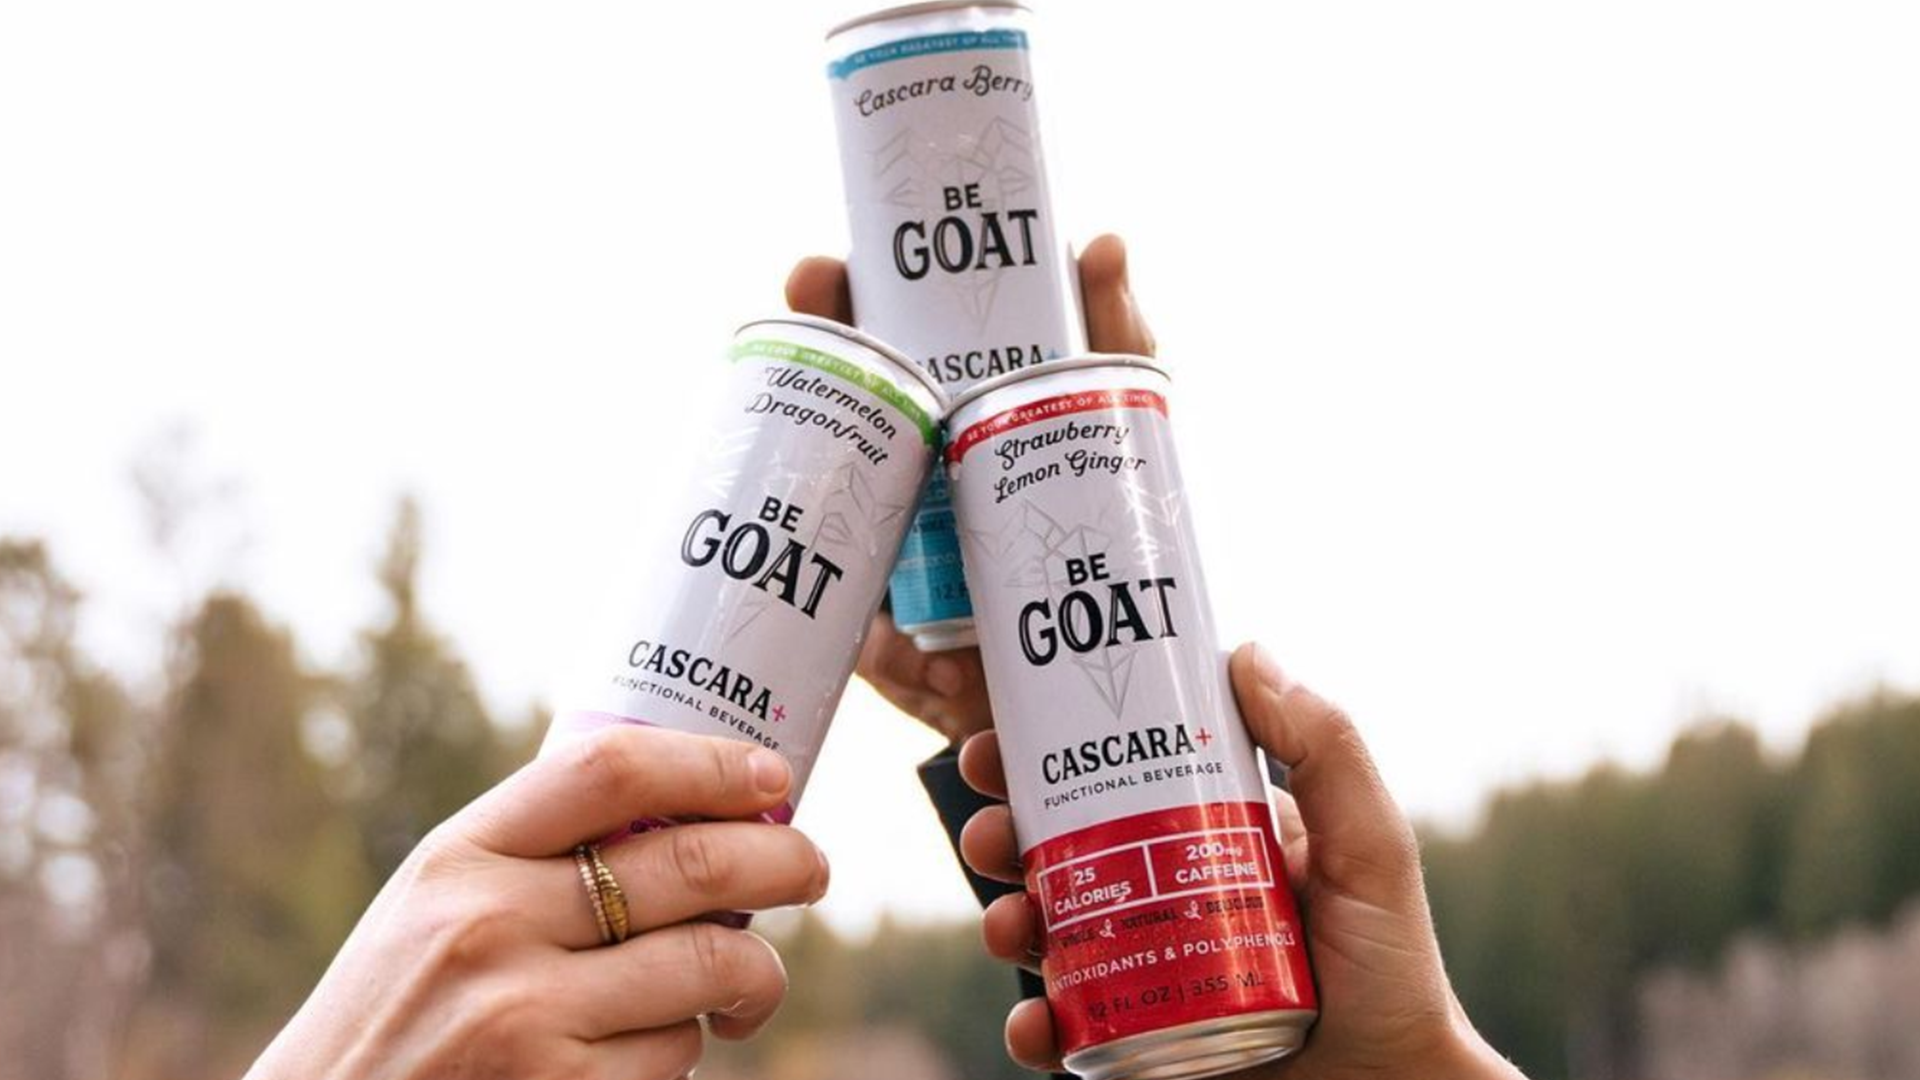 Cheers of Be Goat drink cans